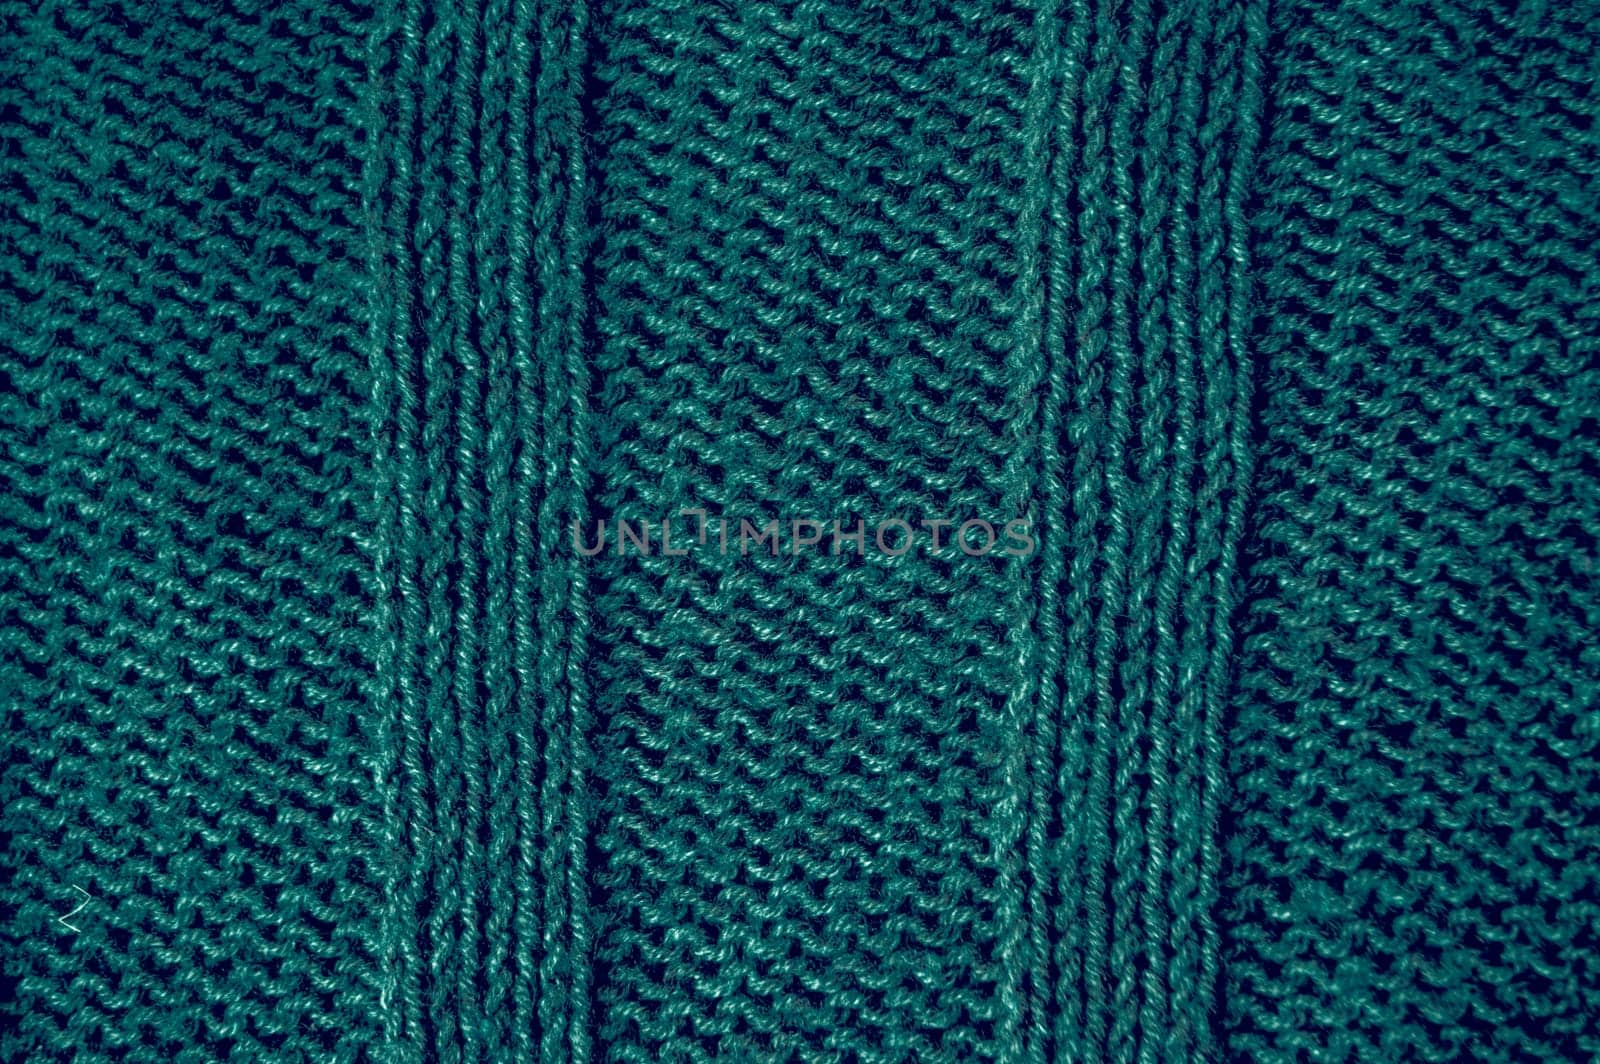 Macro Knitting Texture. Abstract Woven Textile. Knitwear Christmas Texture. Knitted Texture. Fiber Thread. Nordic Warm Carpet. Cotton Yarn Material. Structure Knitted Background.